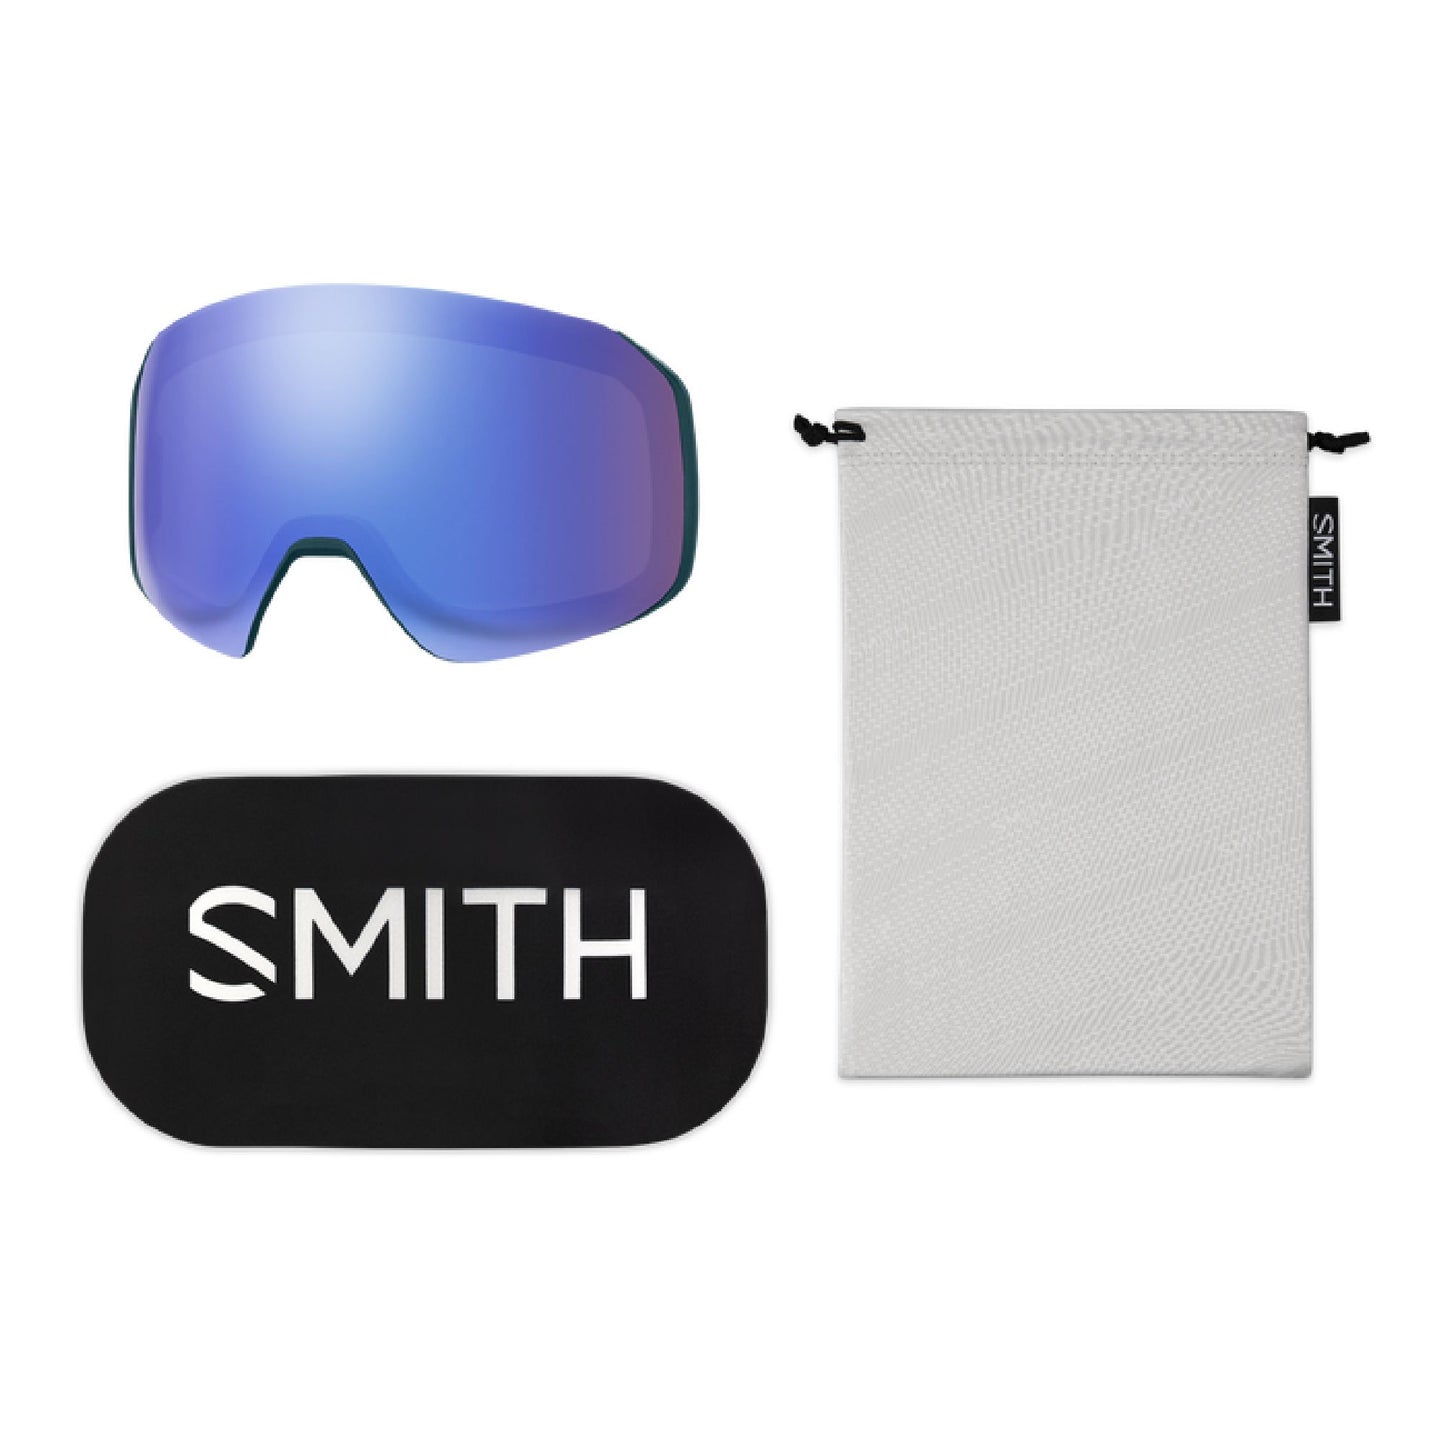 Smith 4D MAG S Low Bridge Fit Snow Goggle Pacific Flow / ChromaPop Everyday Green Mirror Snow Goggles